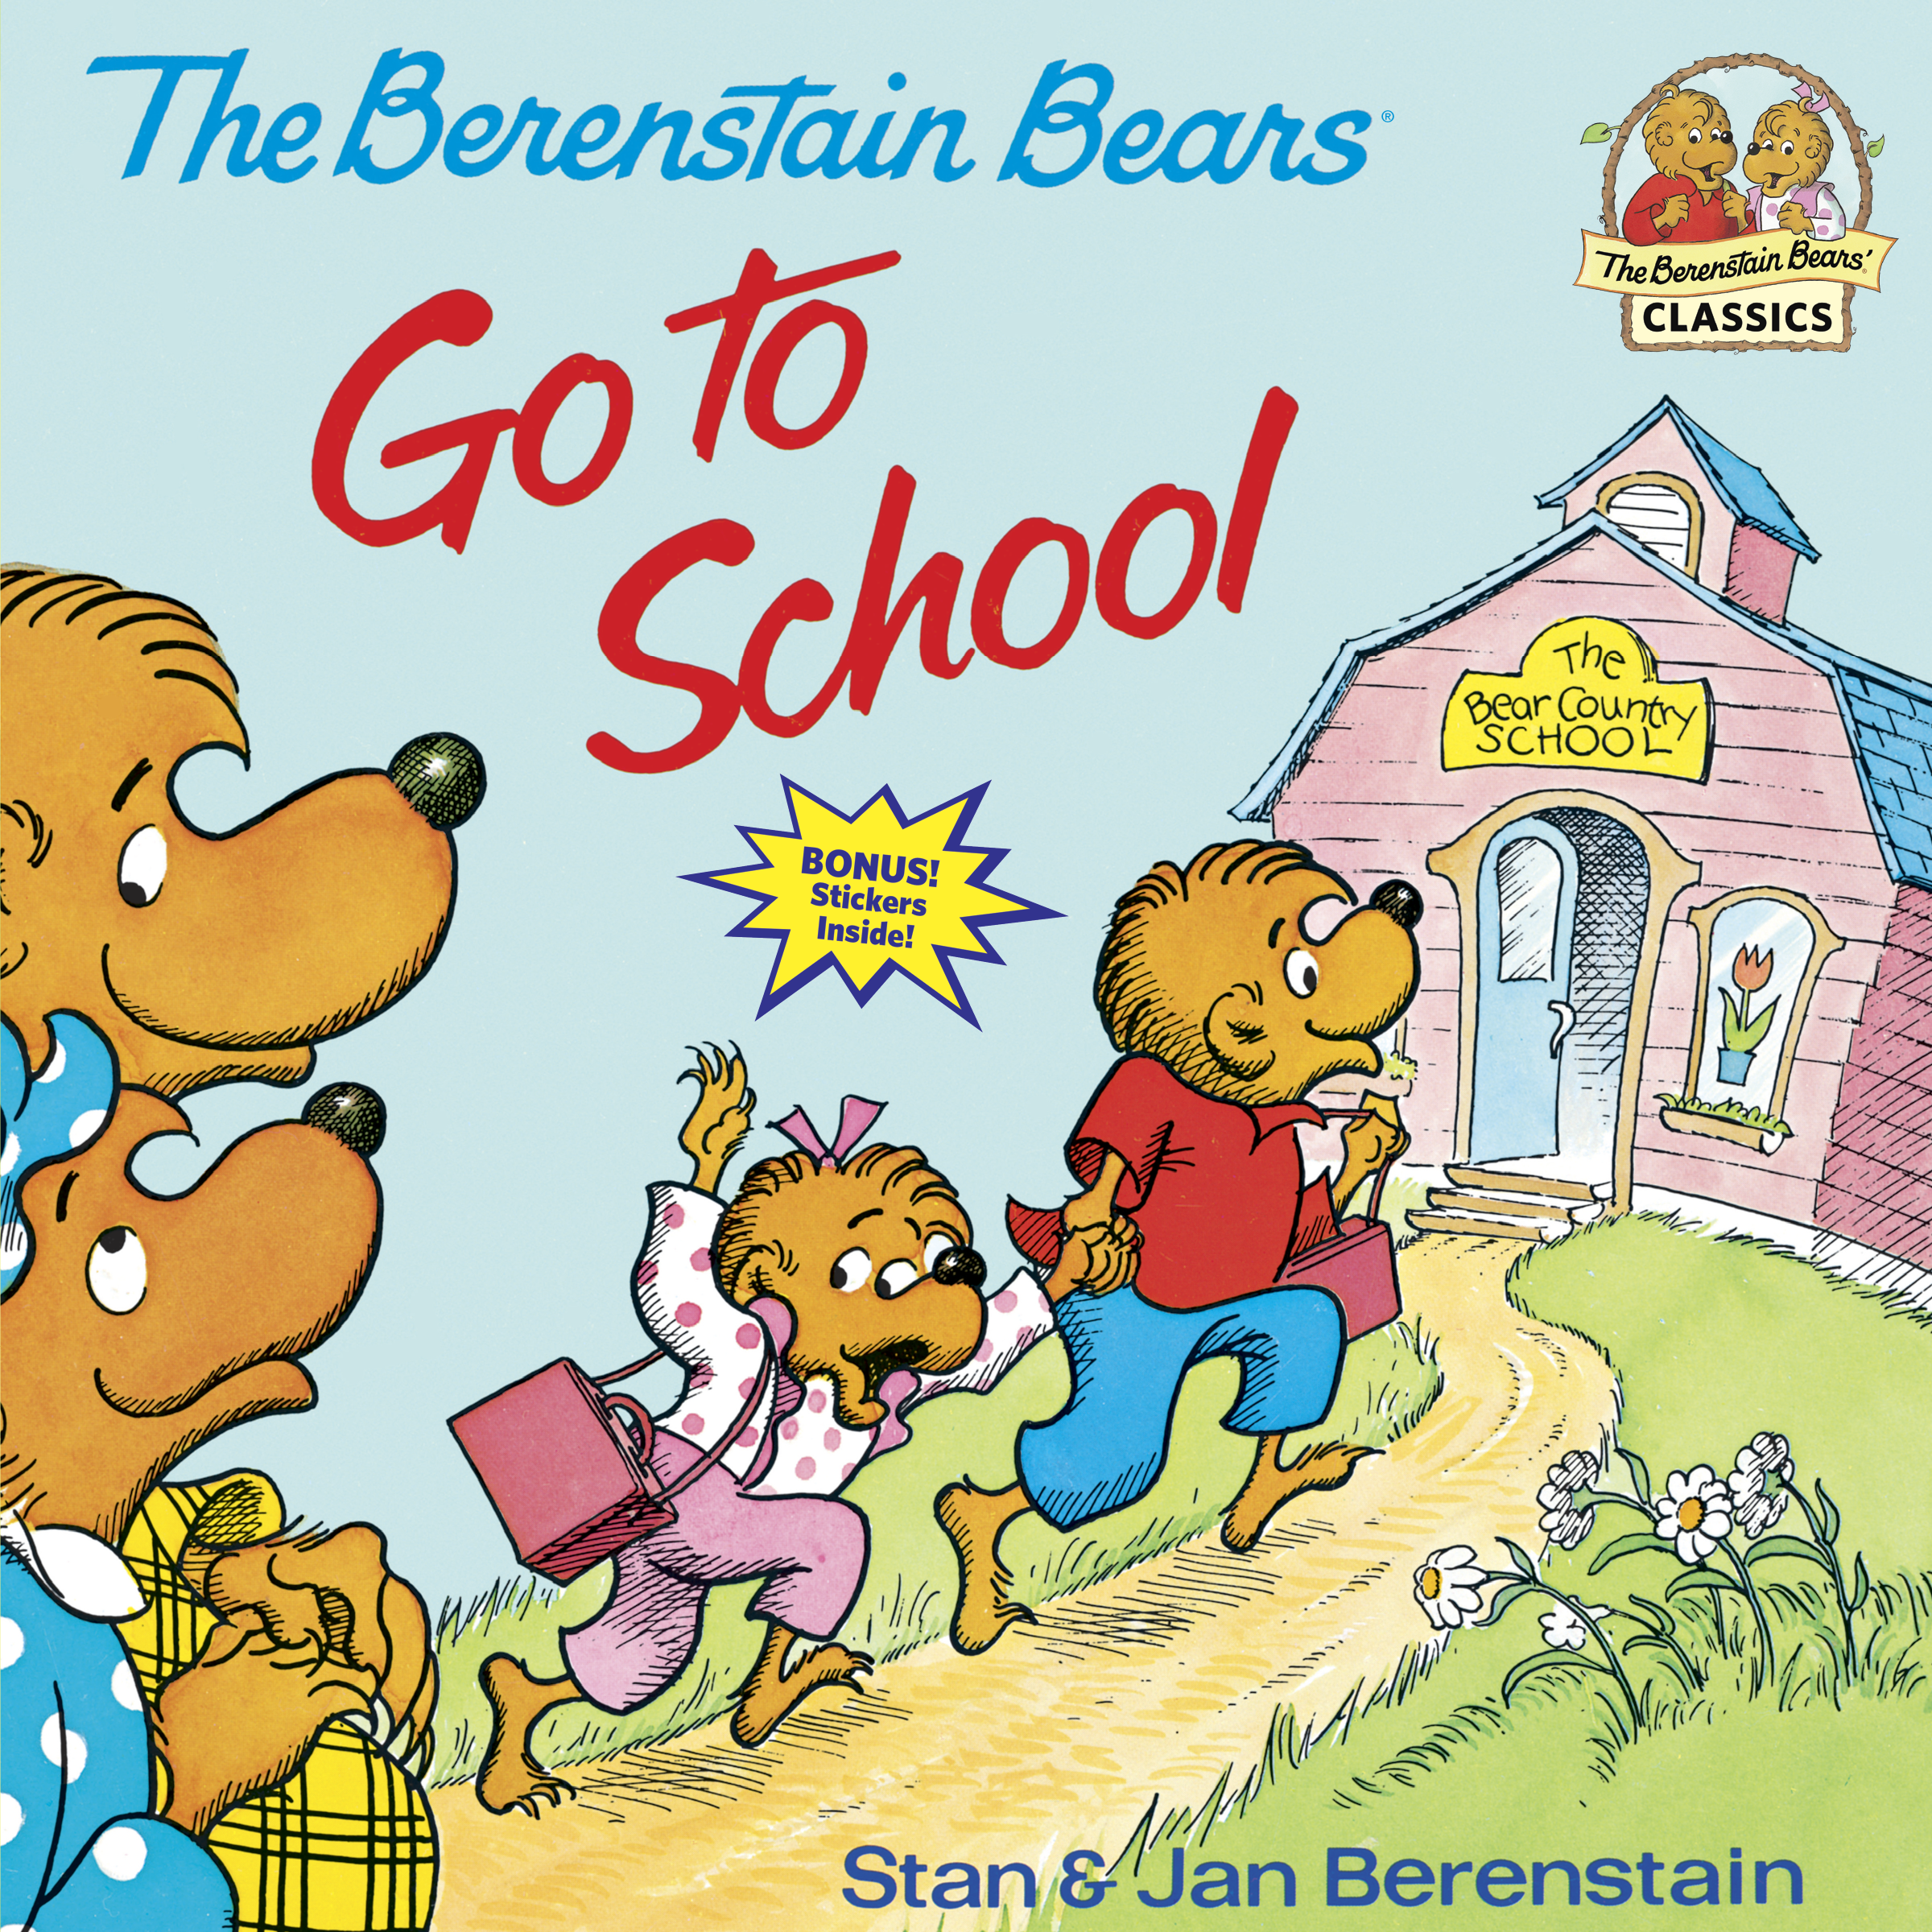 The Berenstain Bears Go to School (Paperback)